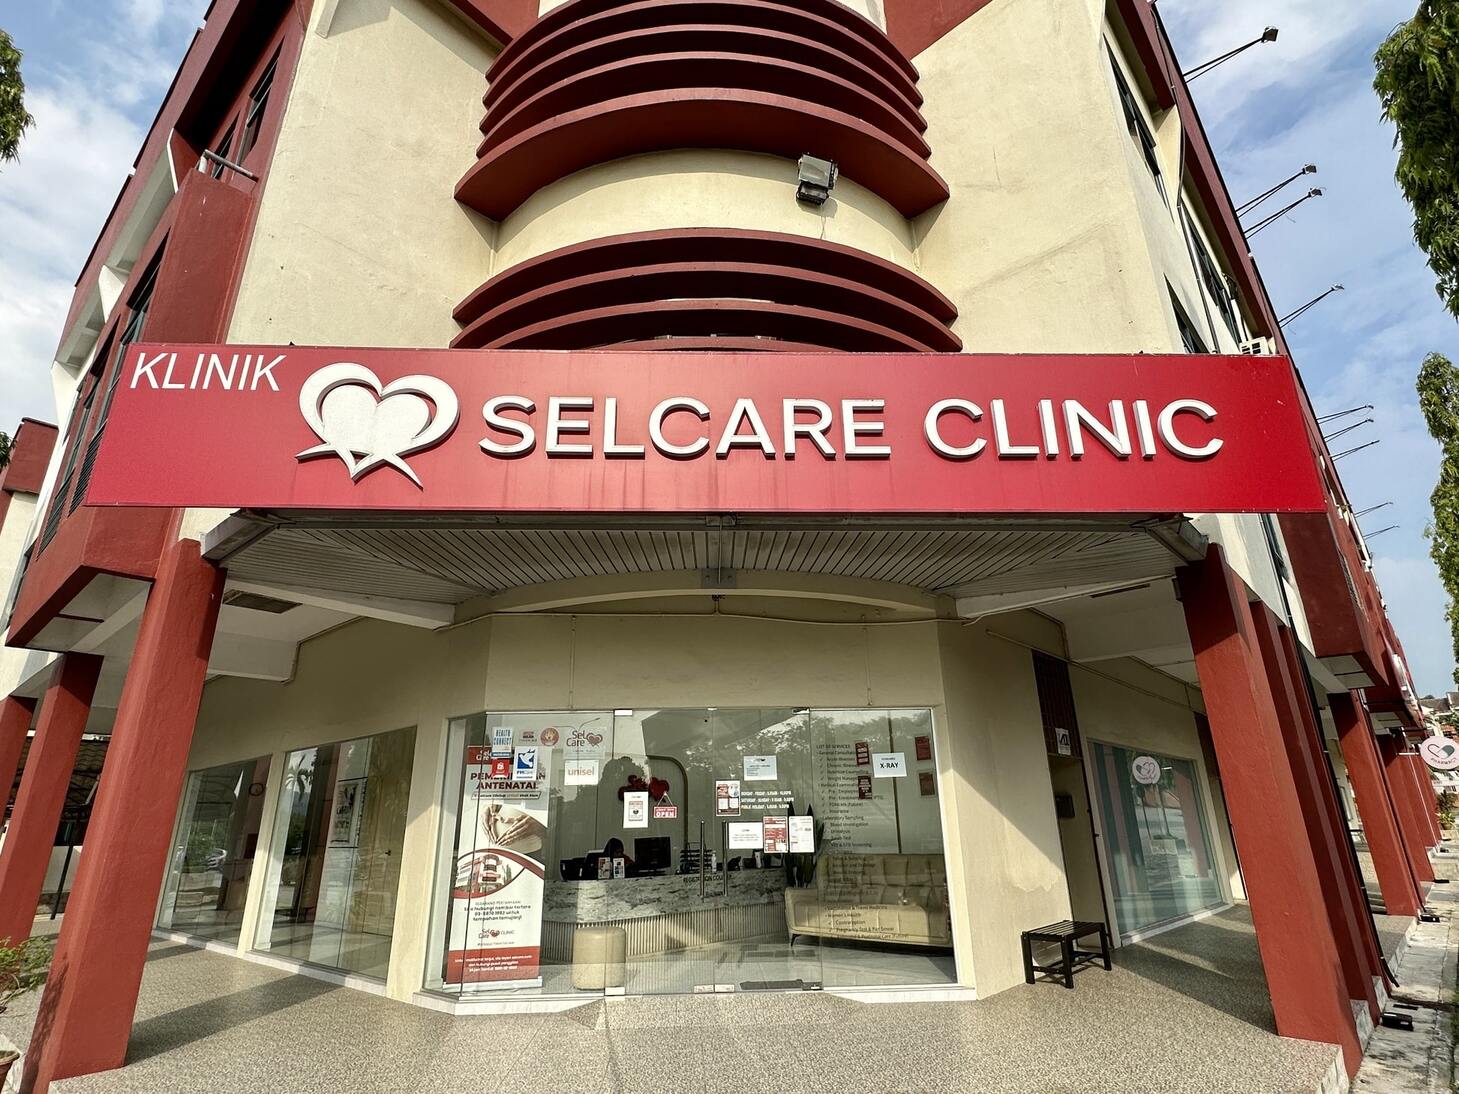 Selcare clinic in Unisel